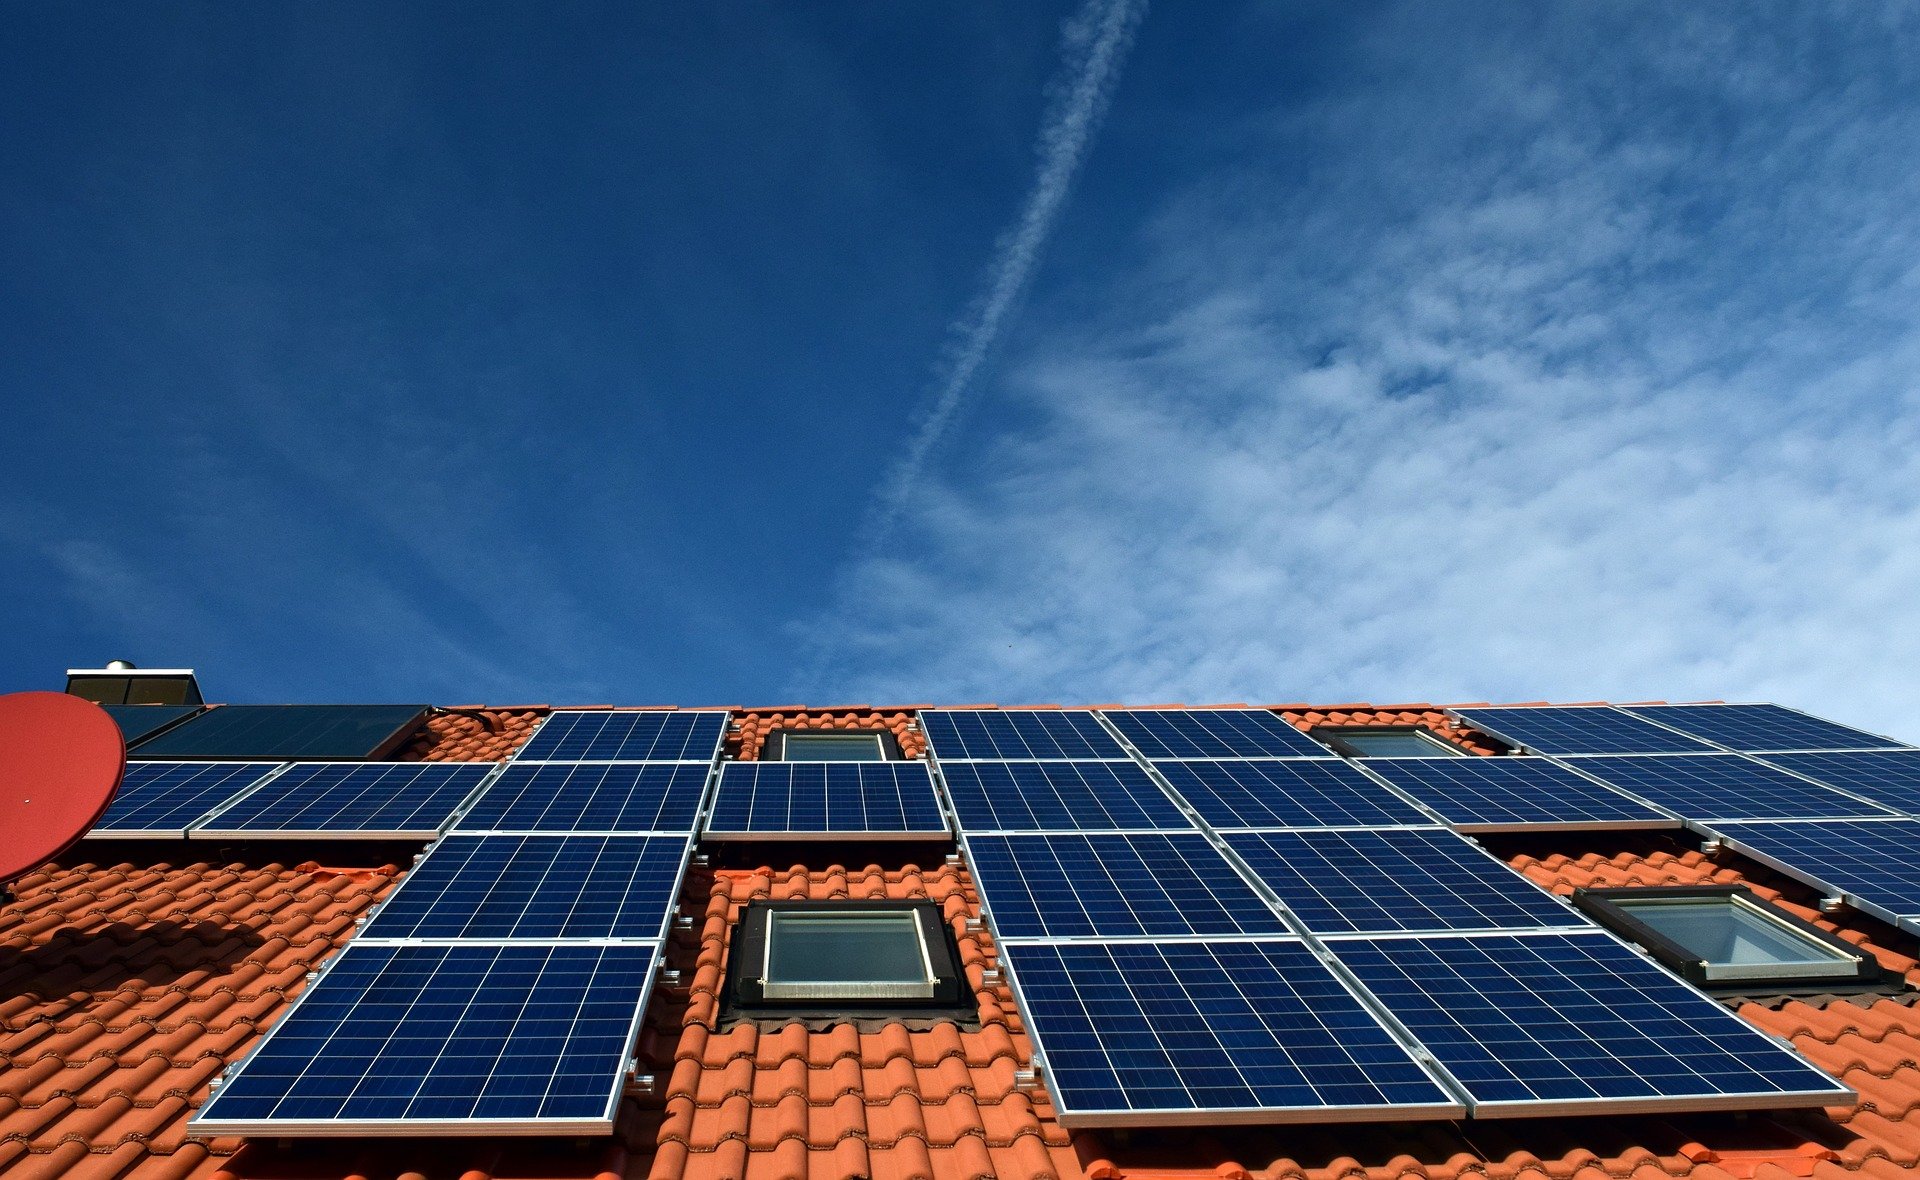 Want to install a solar rooftop? Read this first